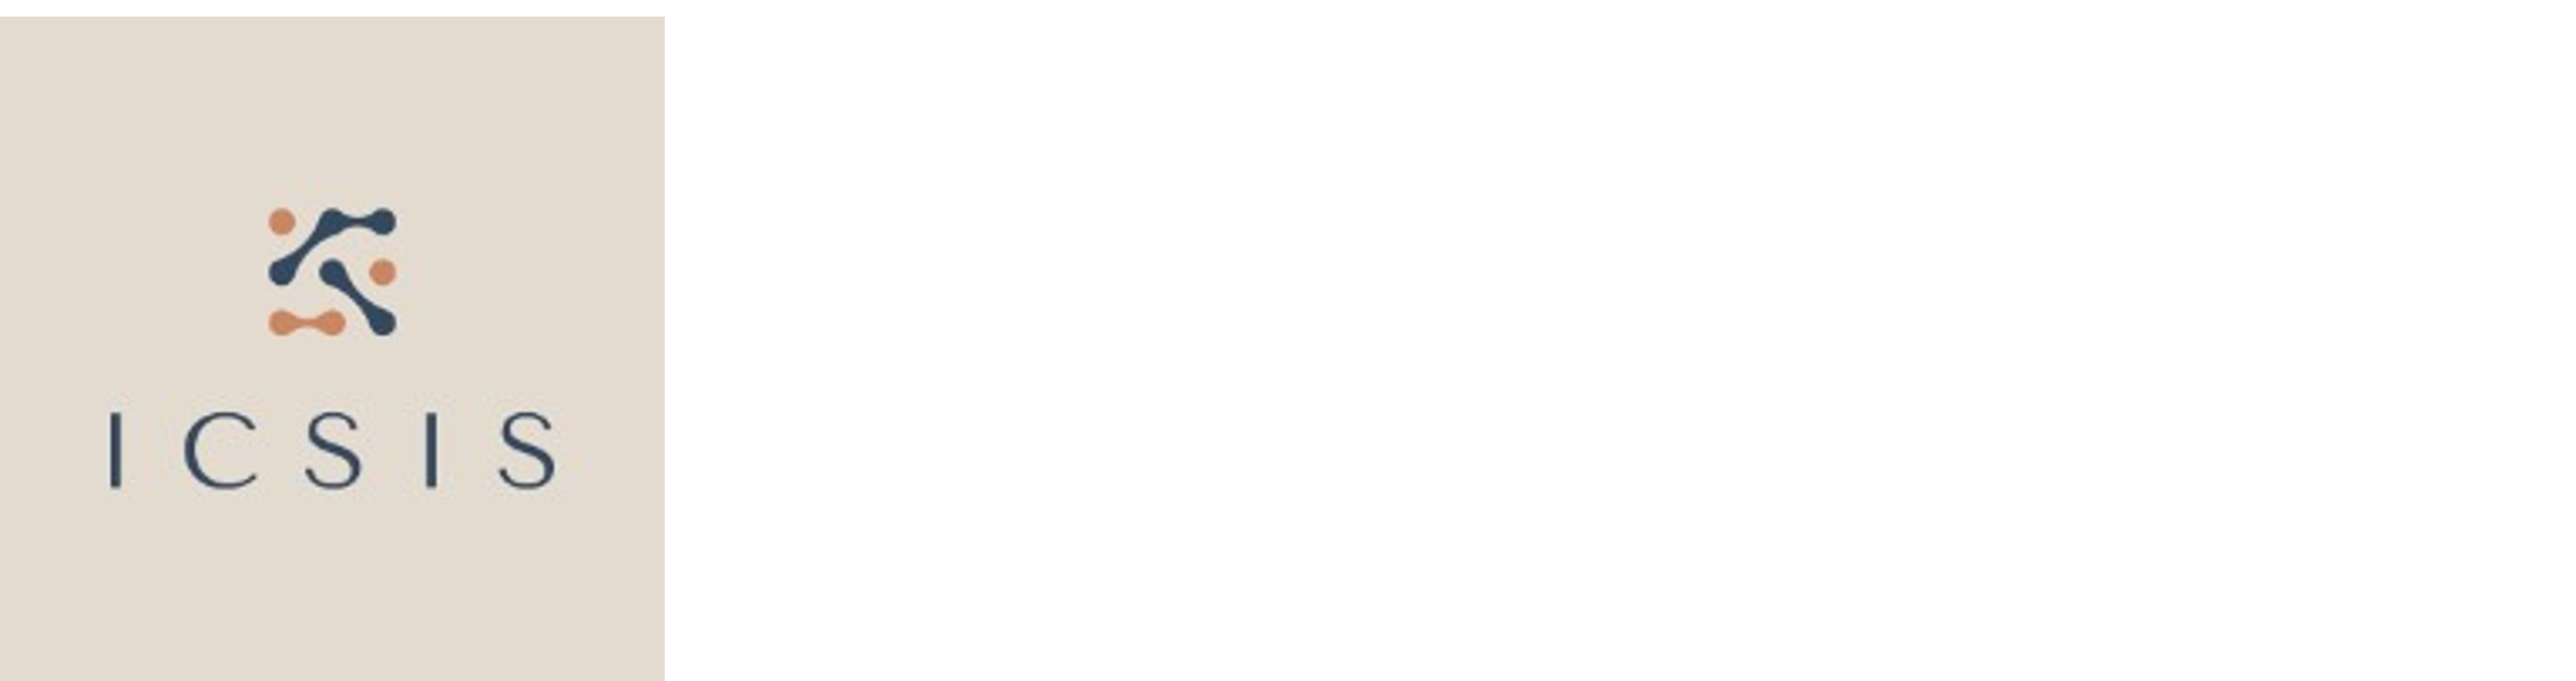 International Conference on Scientific and Innovative Studies